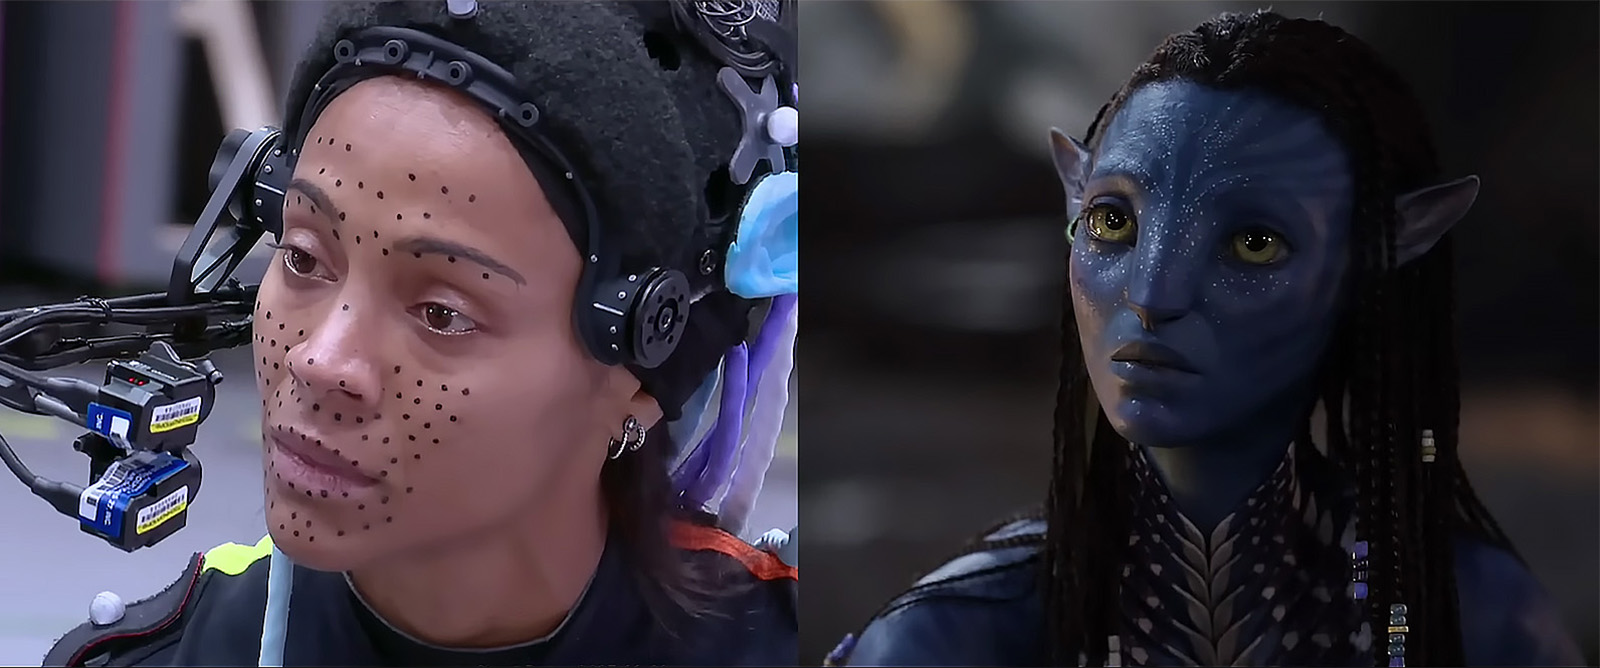 Wētā FX’s facial recognition tool, APFS, replicate the nuances of the human performances in Avatar. Image © Disney